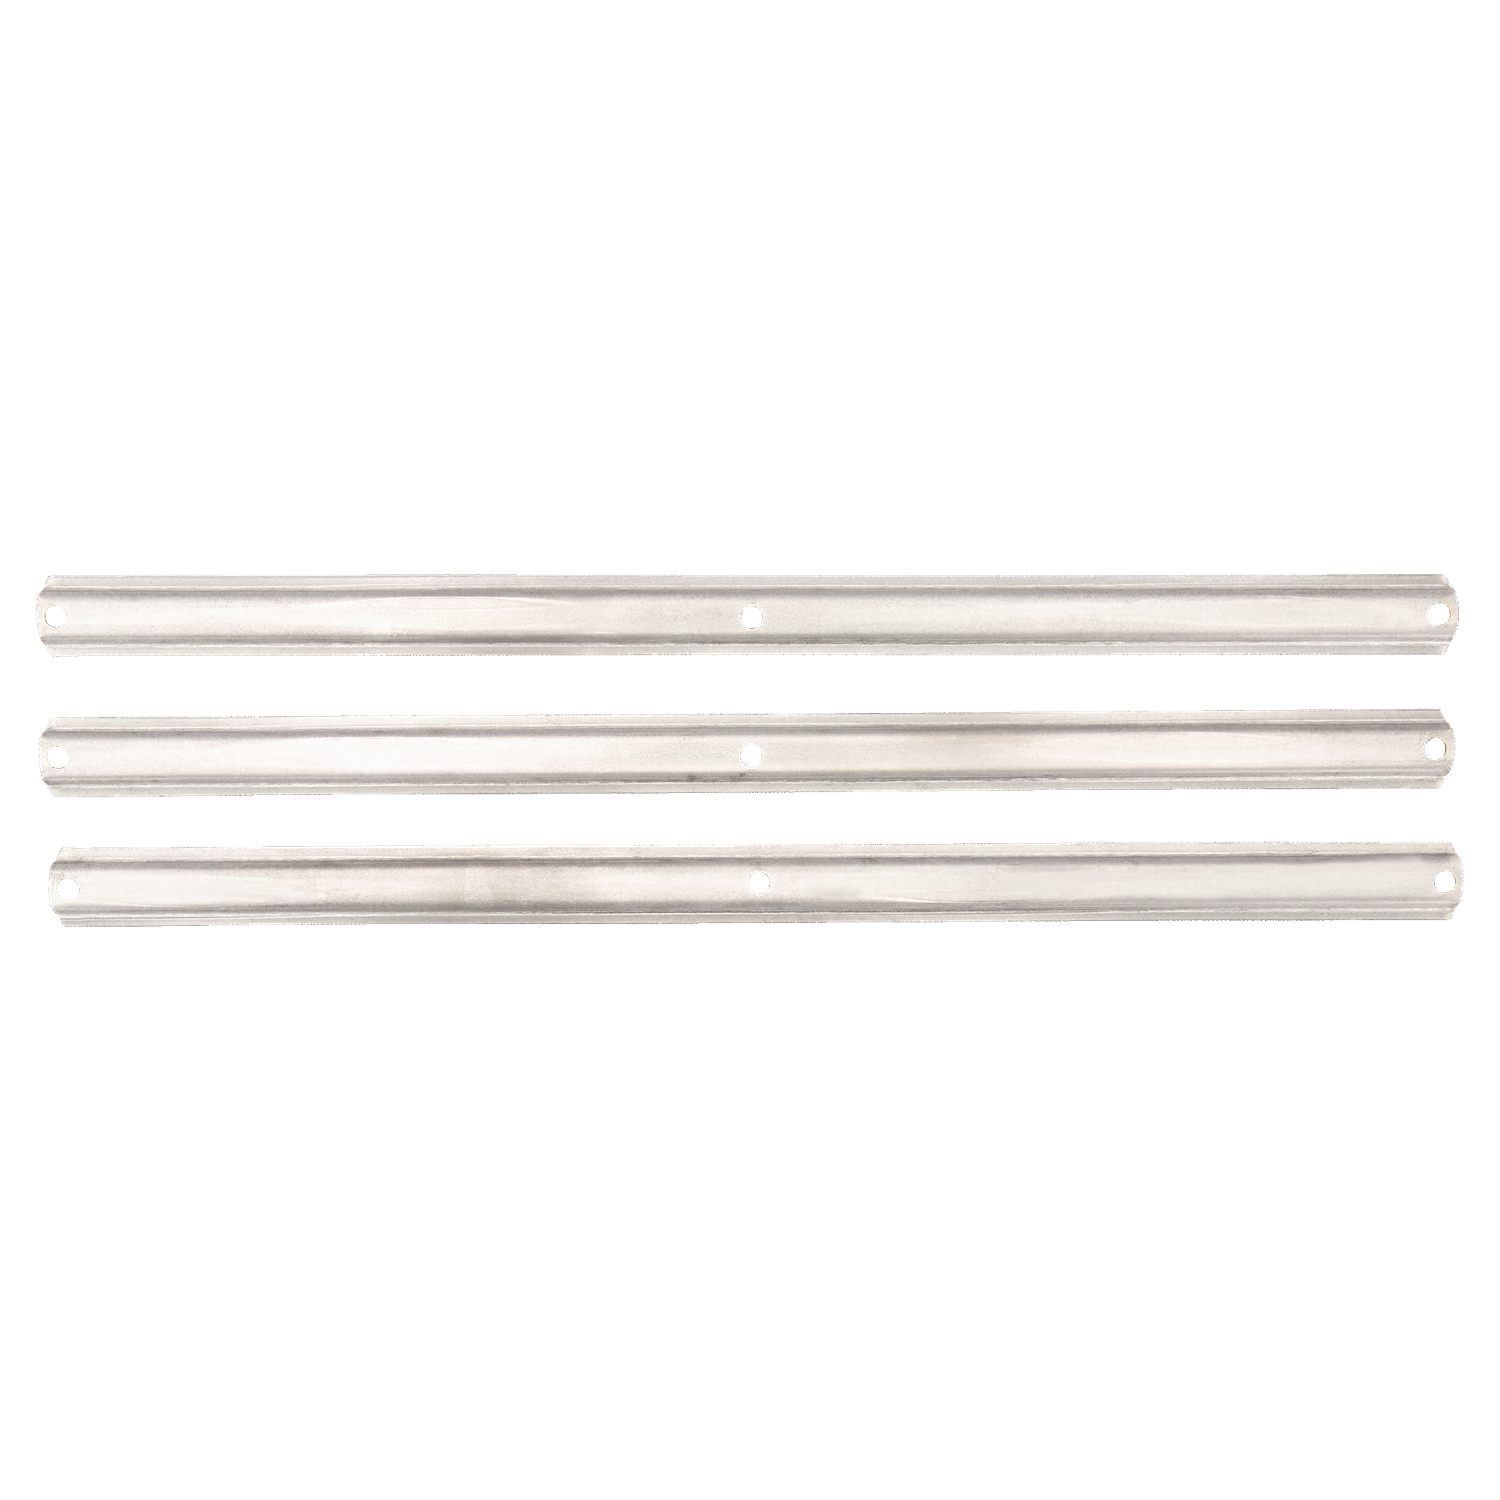 BAHCO RAIL-187/264/340 Socket Rail 1/4” 3/8” and 1/2” Clips - Premium Socket Rail from BAHCO - Shop now at Yew Aik.